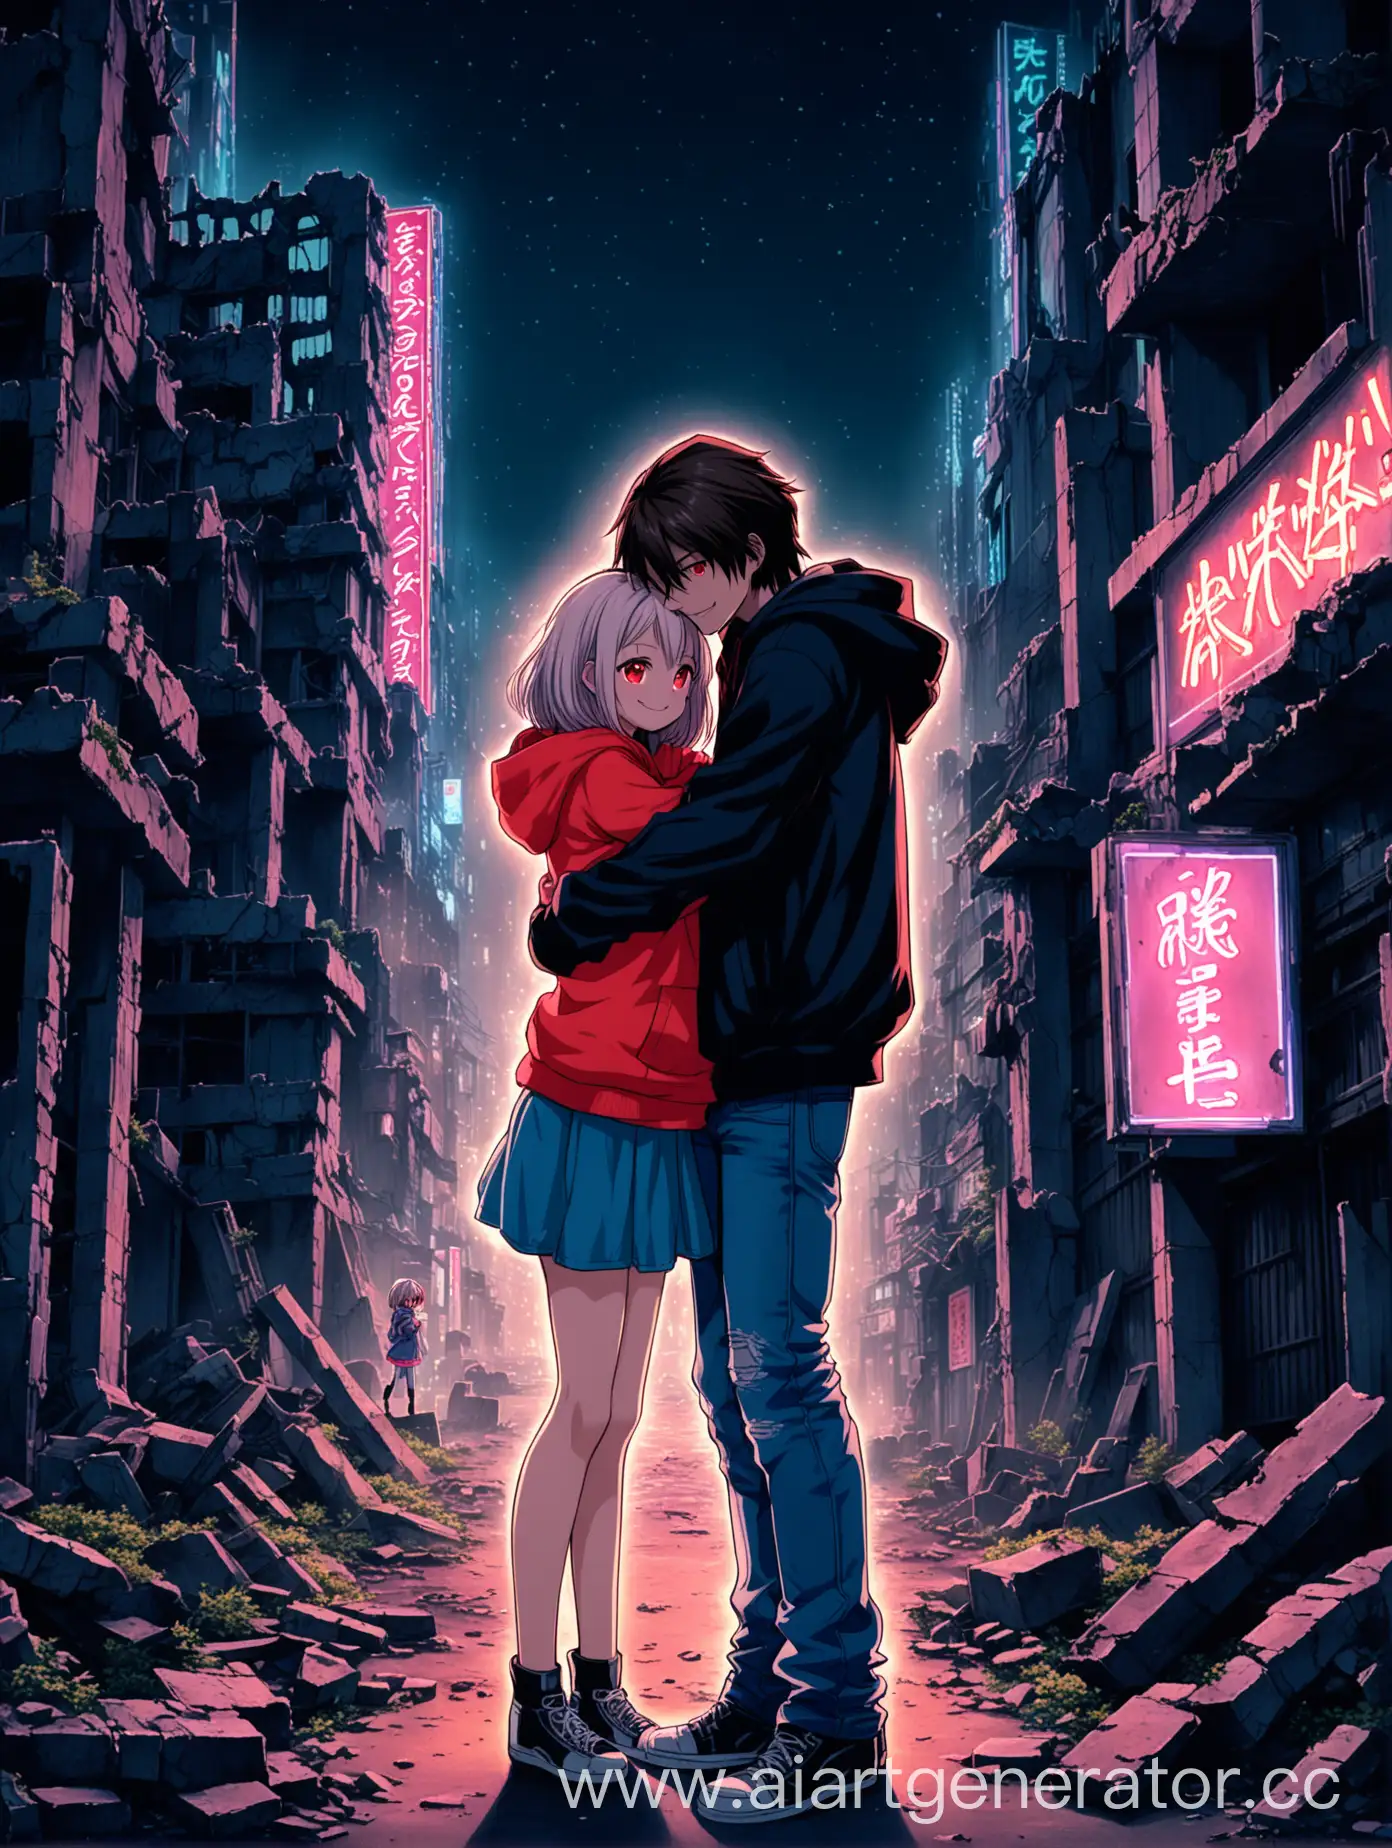 Embracing-in-Tokyos-Neon-Night-Sukuna-and-the-Hooded-Girl